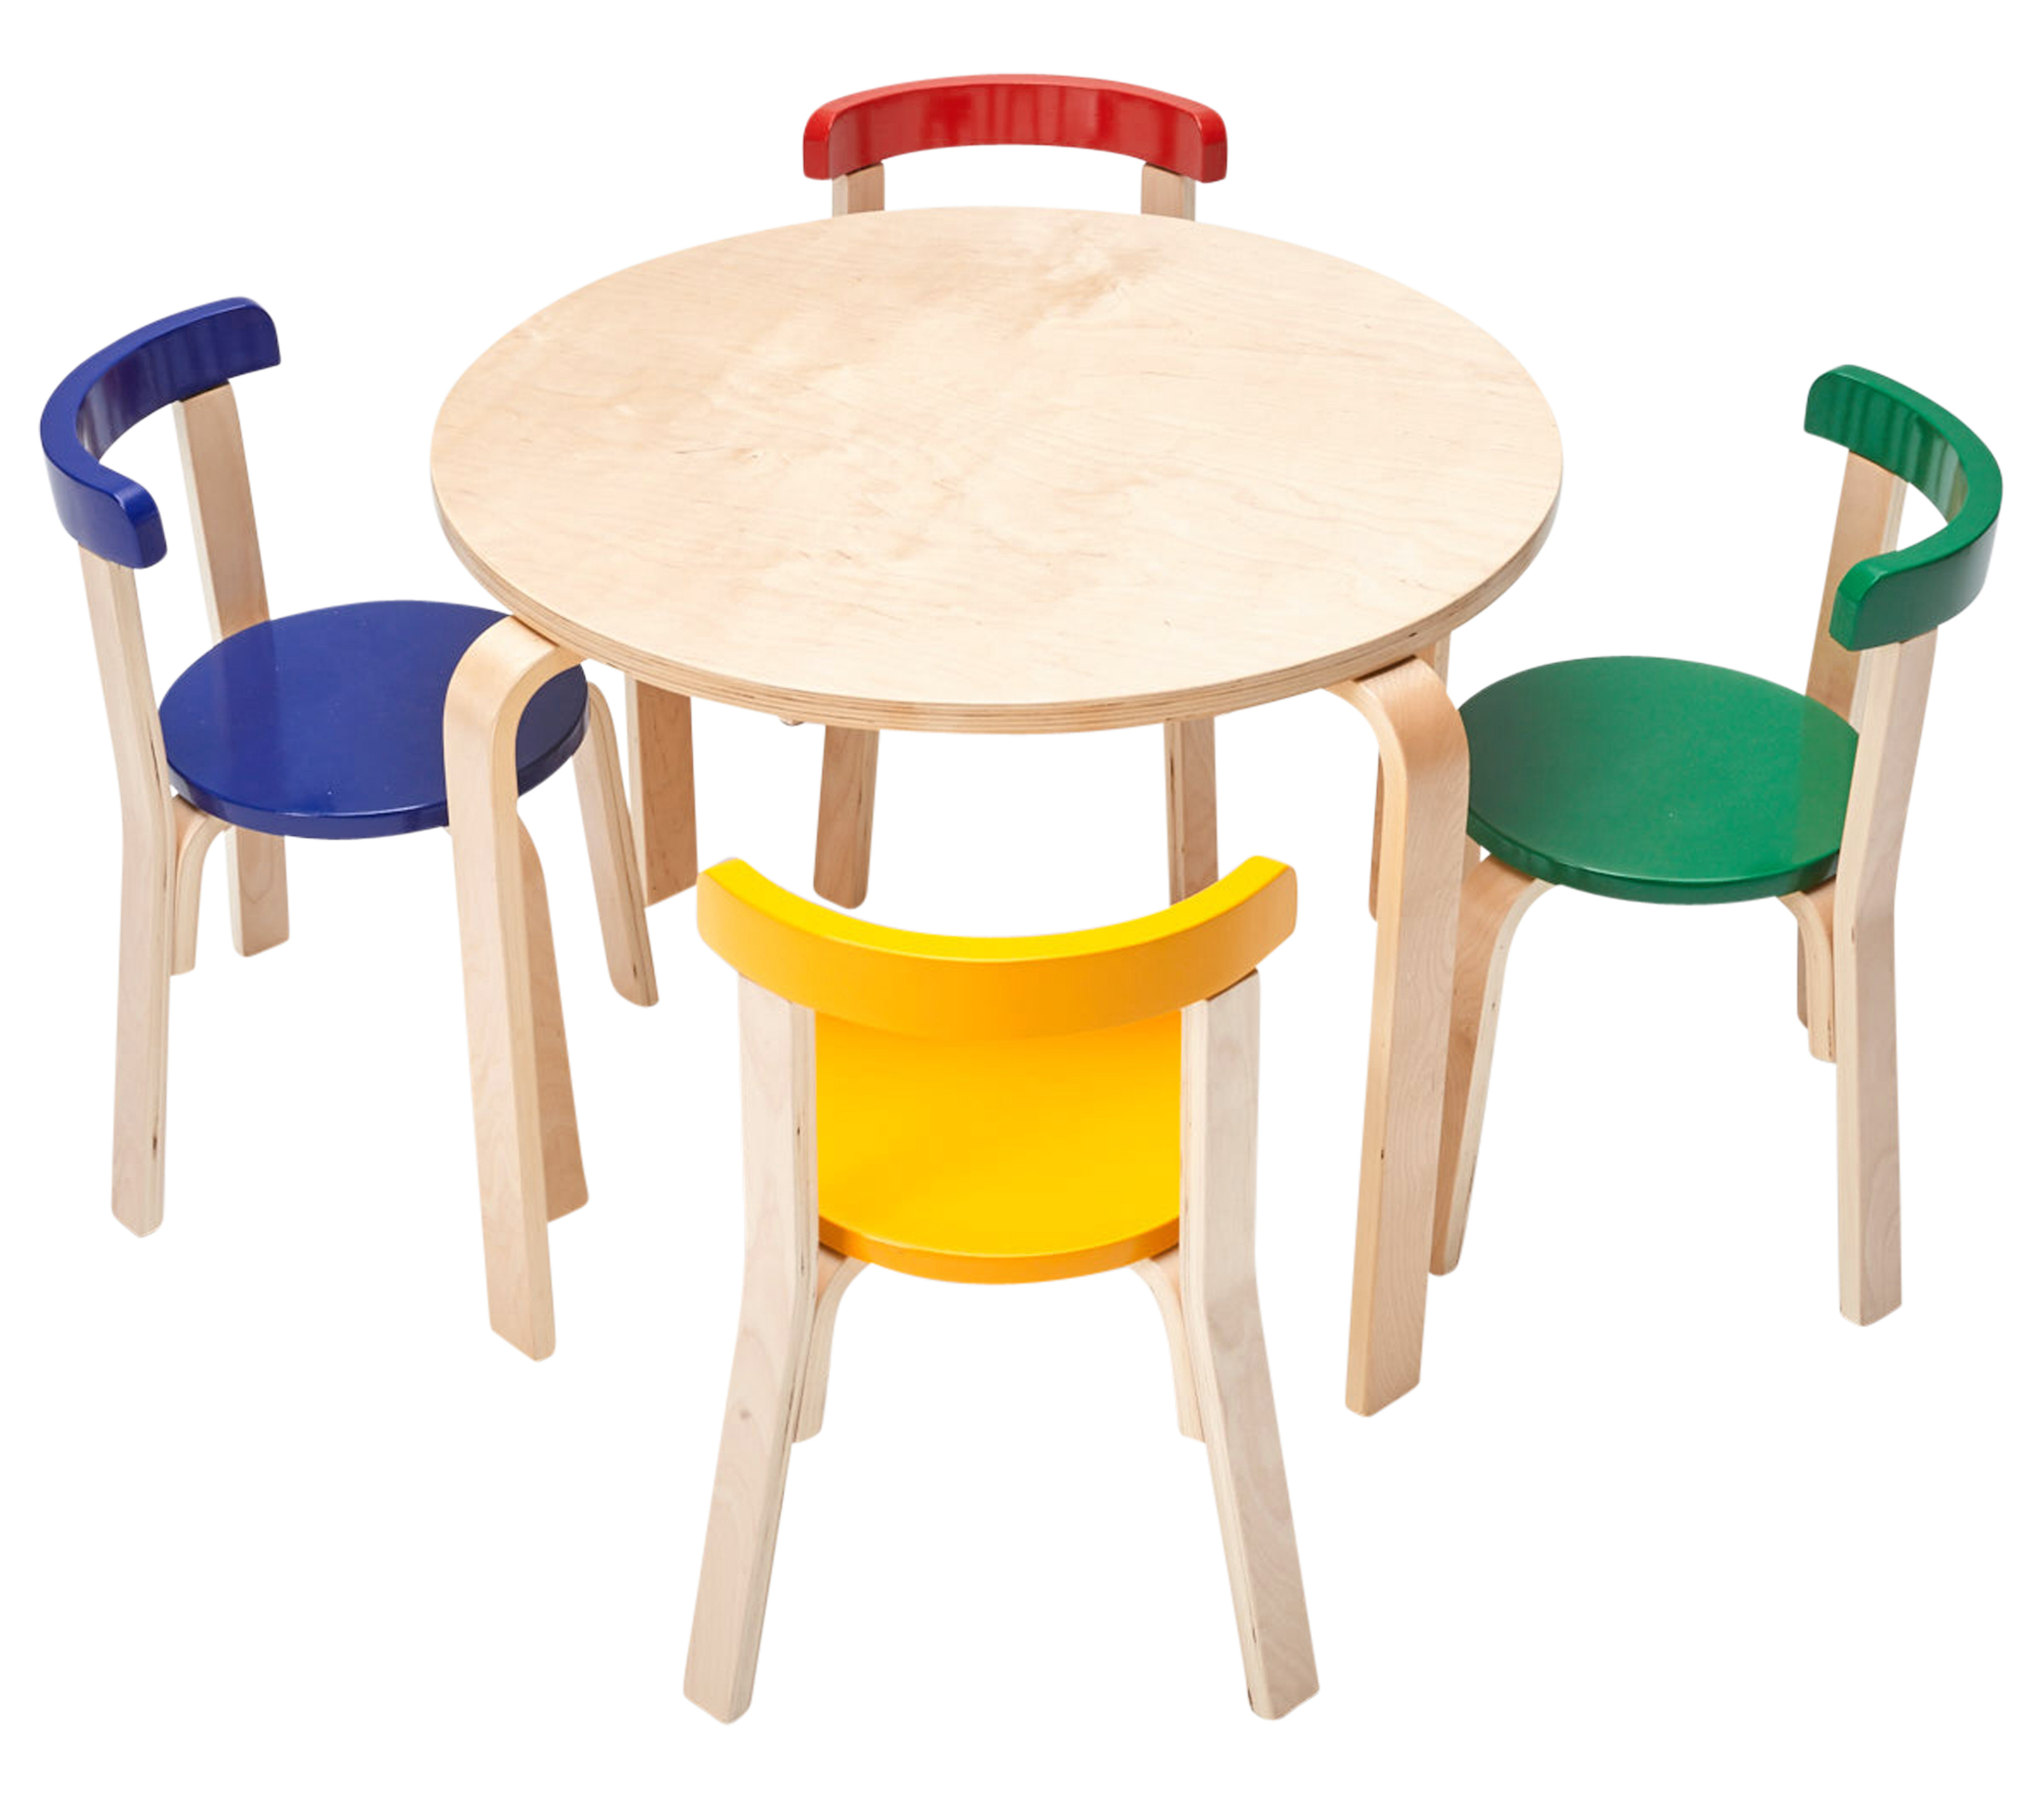 chairs for little ones